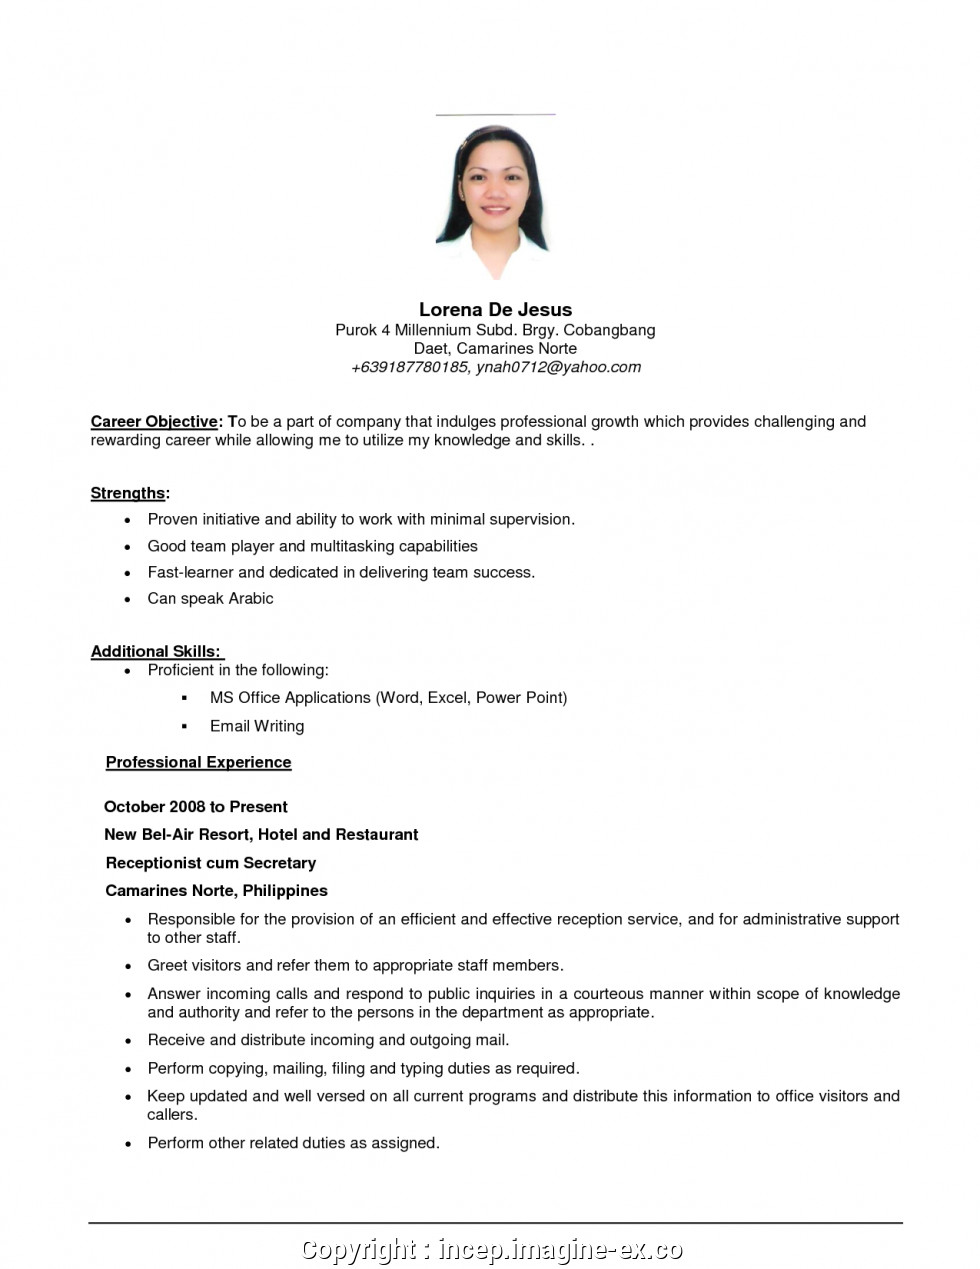 Sample Objective In Resume for Any Position Best Sample Objective In Resume for Any Position Objective